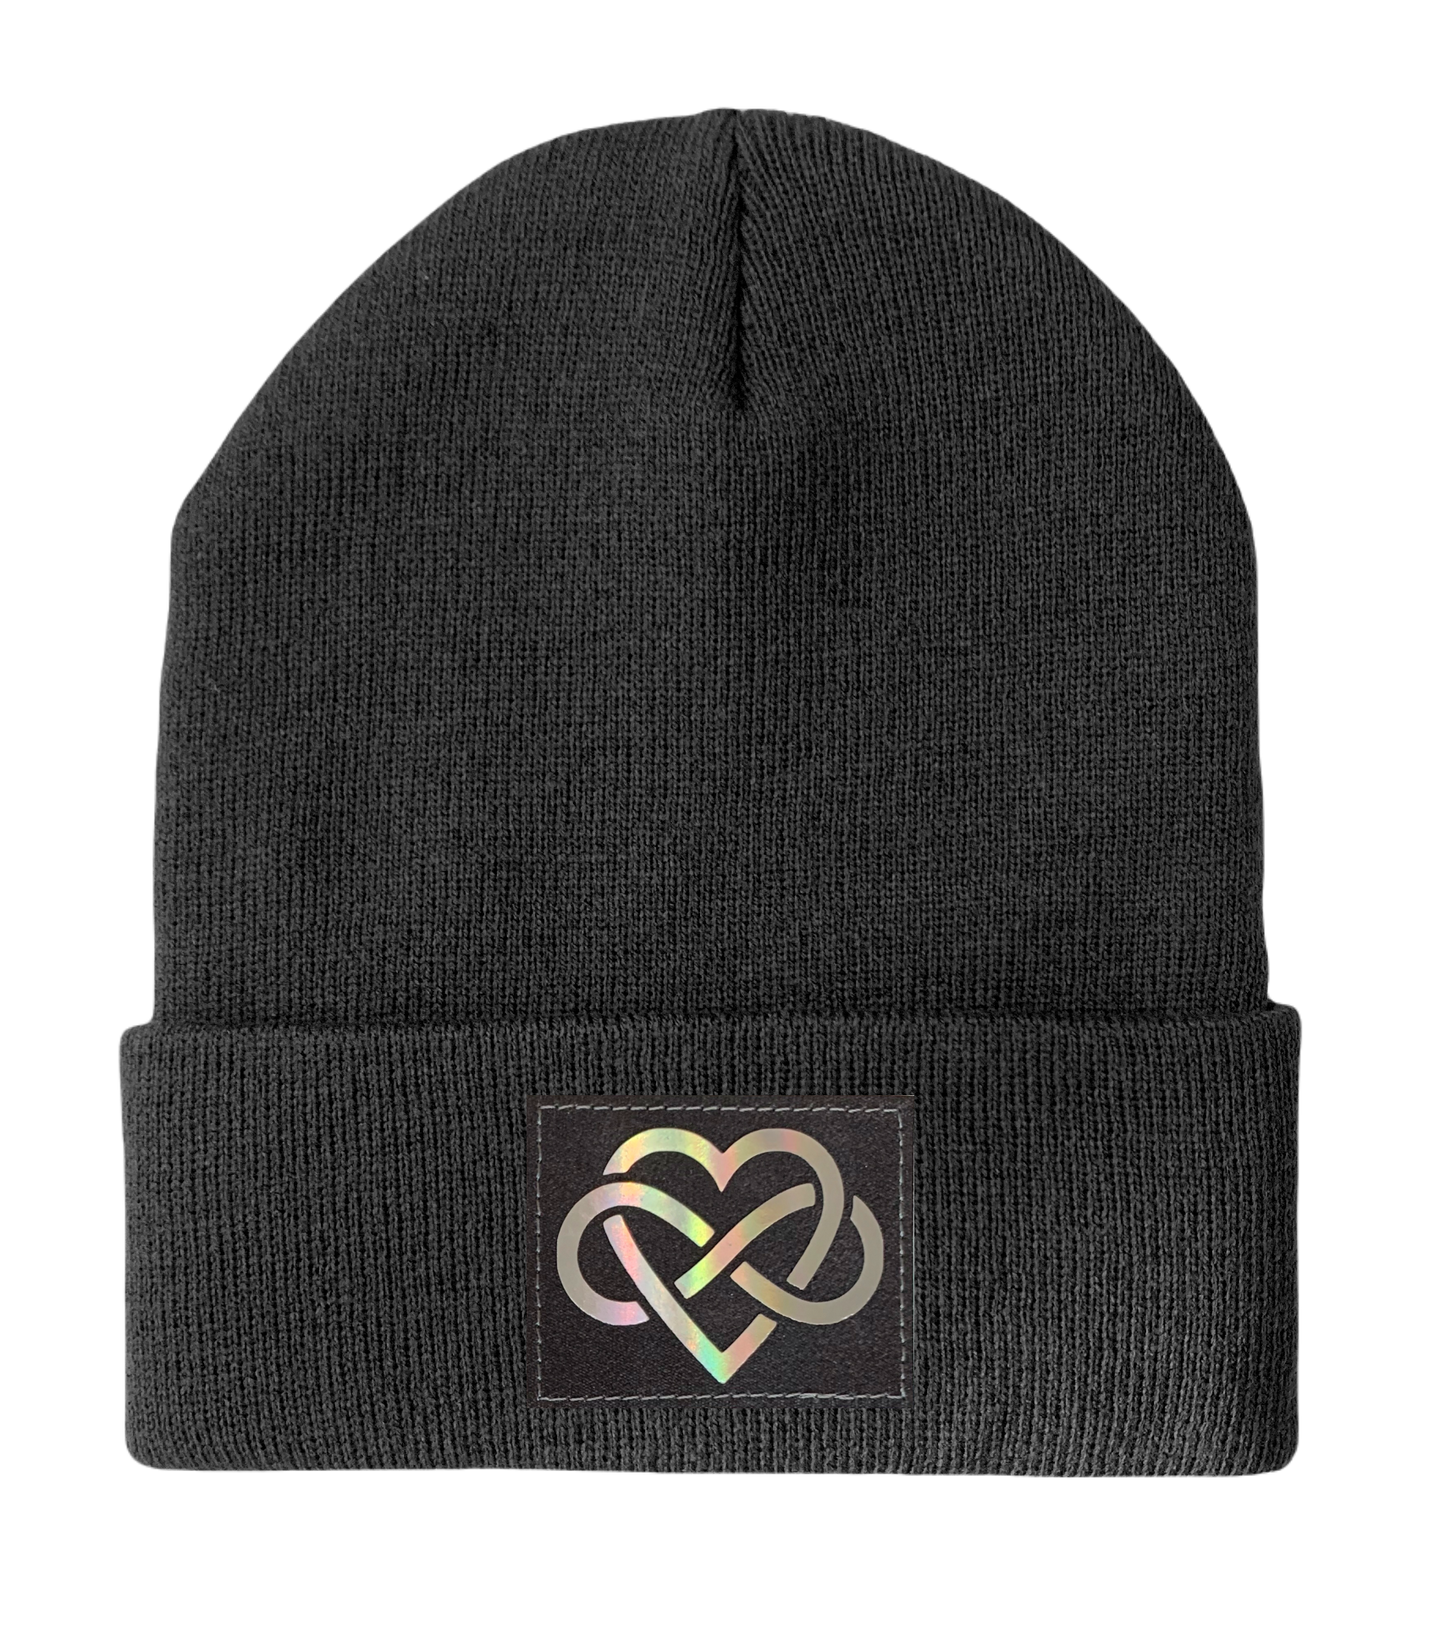 Beanie - Dark Grey Buddha Beanie with Hand Made Grey and Holographic Silver Vegan Leather Infinite Love patch